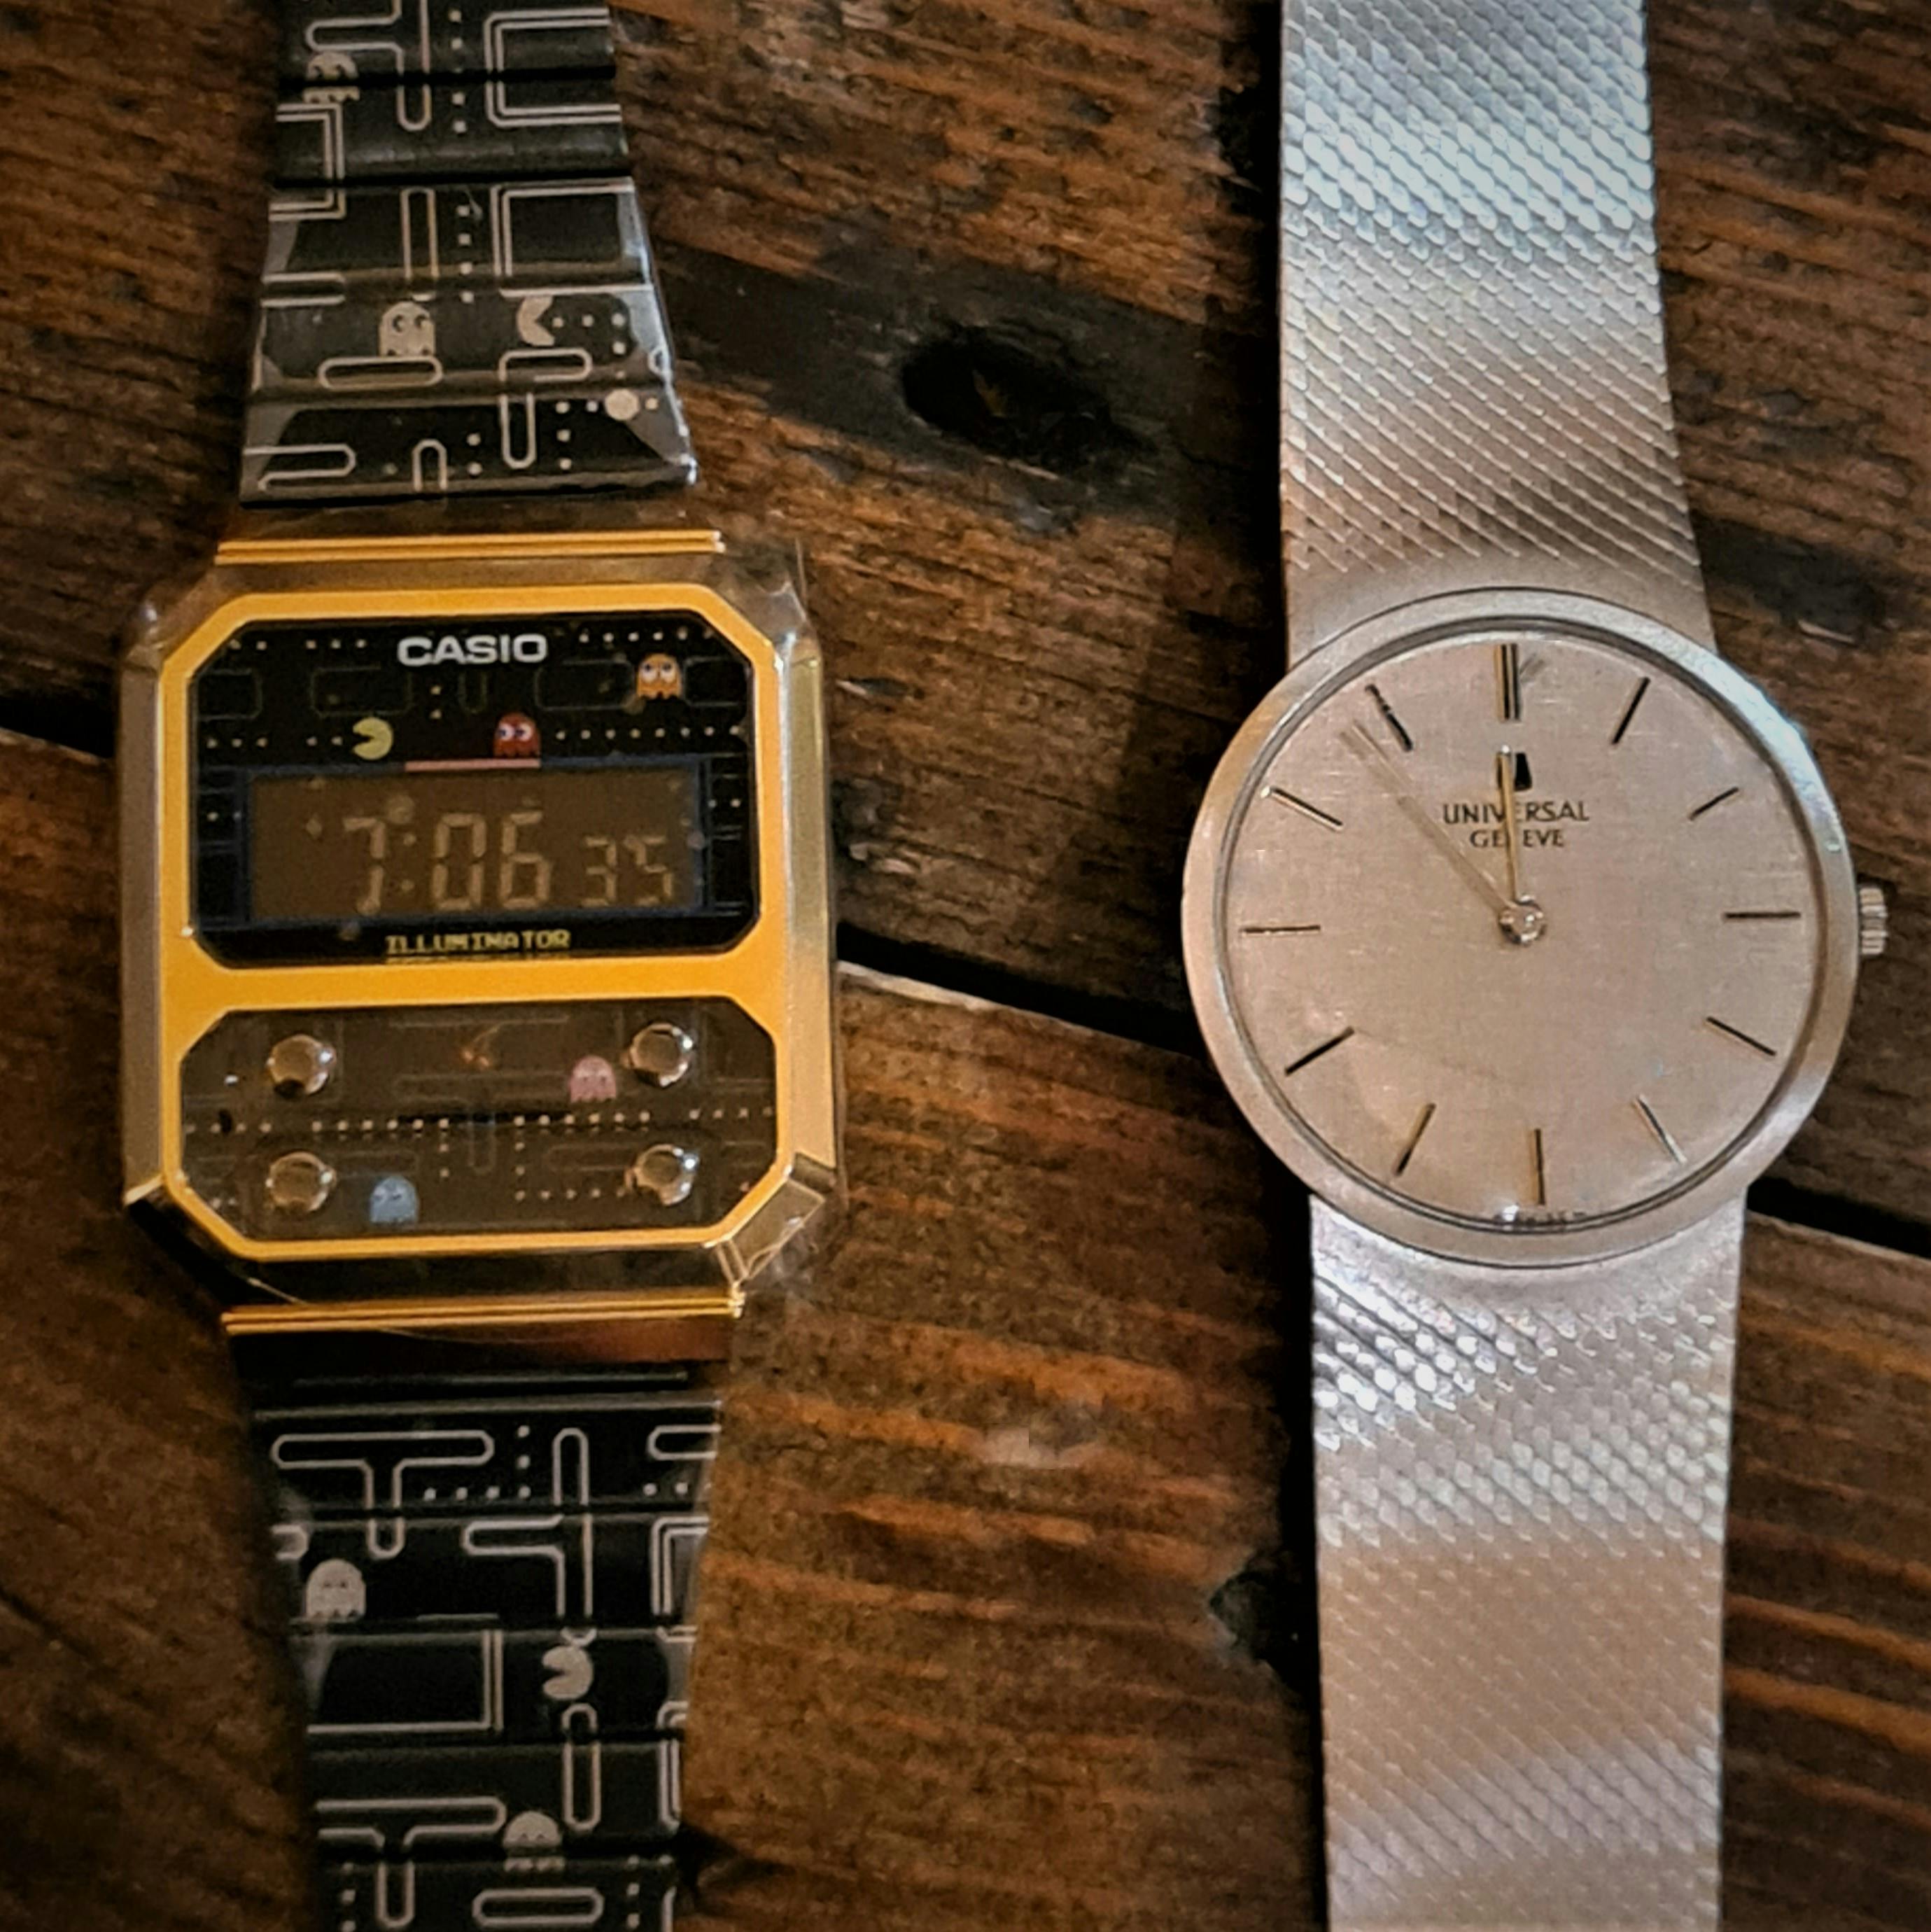 Two completely different watches brought along to a Watch Club Event. You never know what might be there, and what you can learn about!